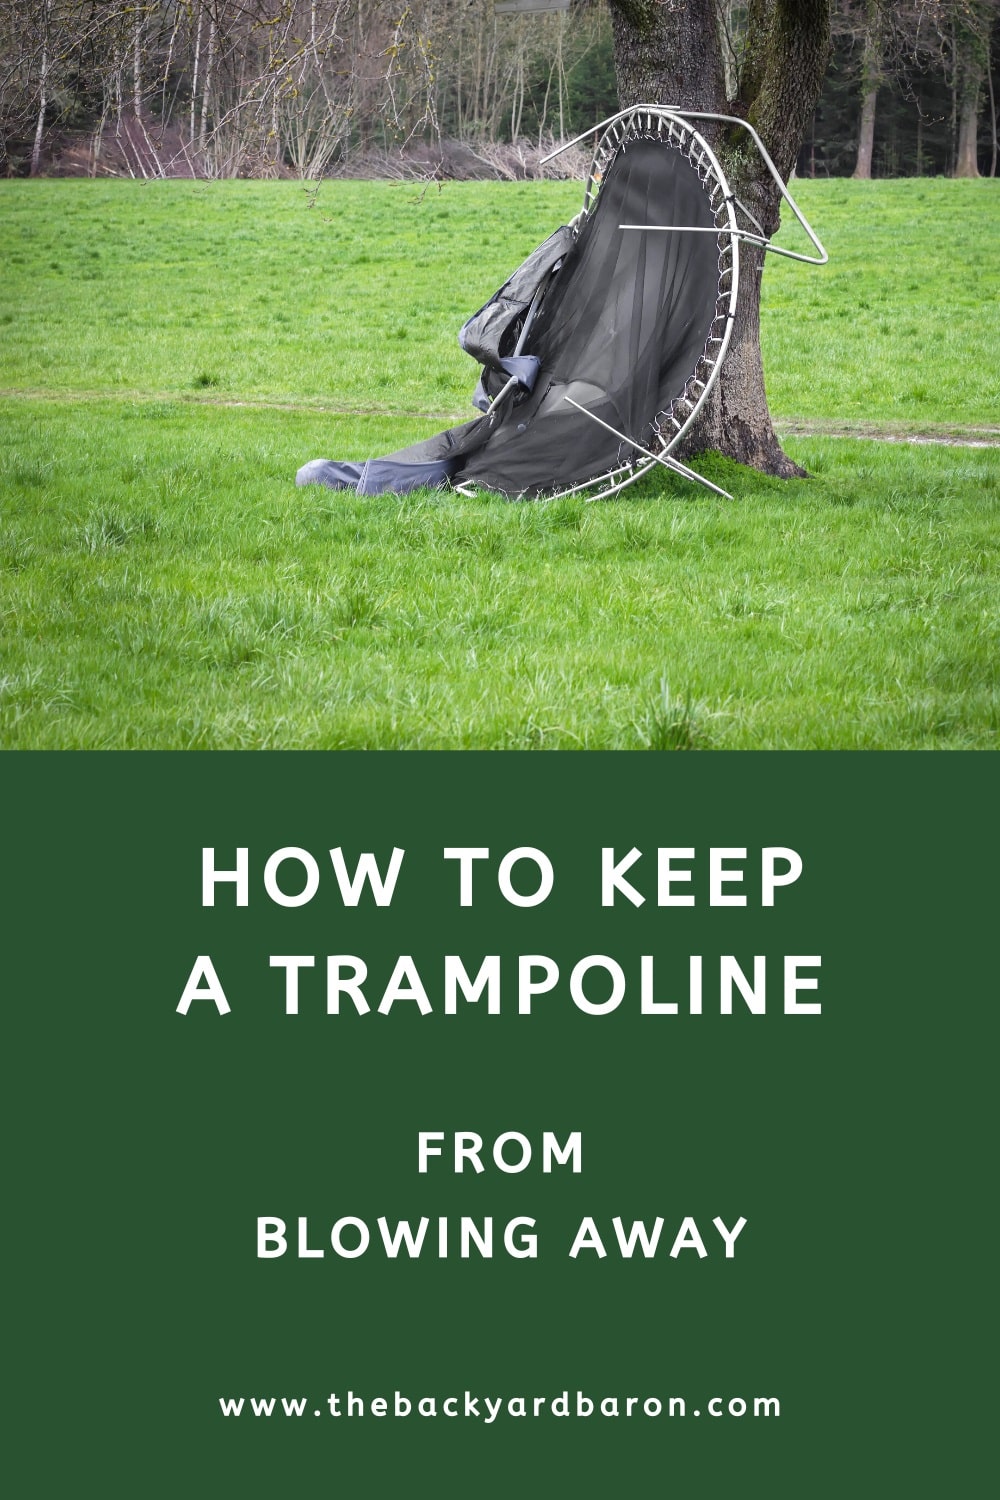 How to keep a trampoline from blowing away